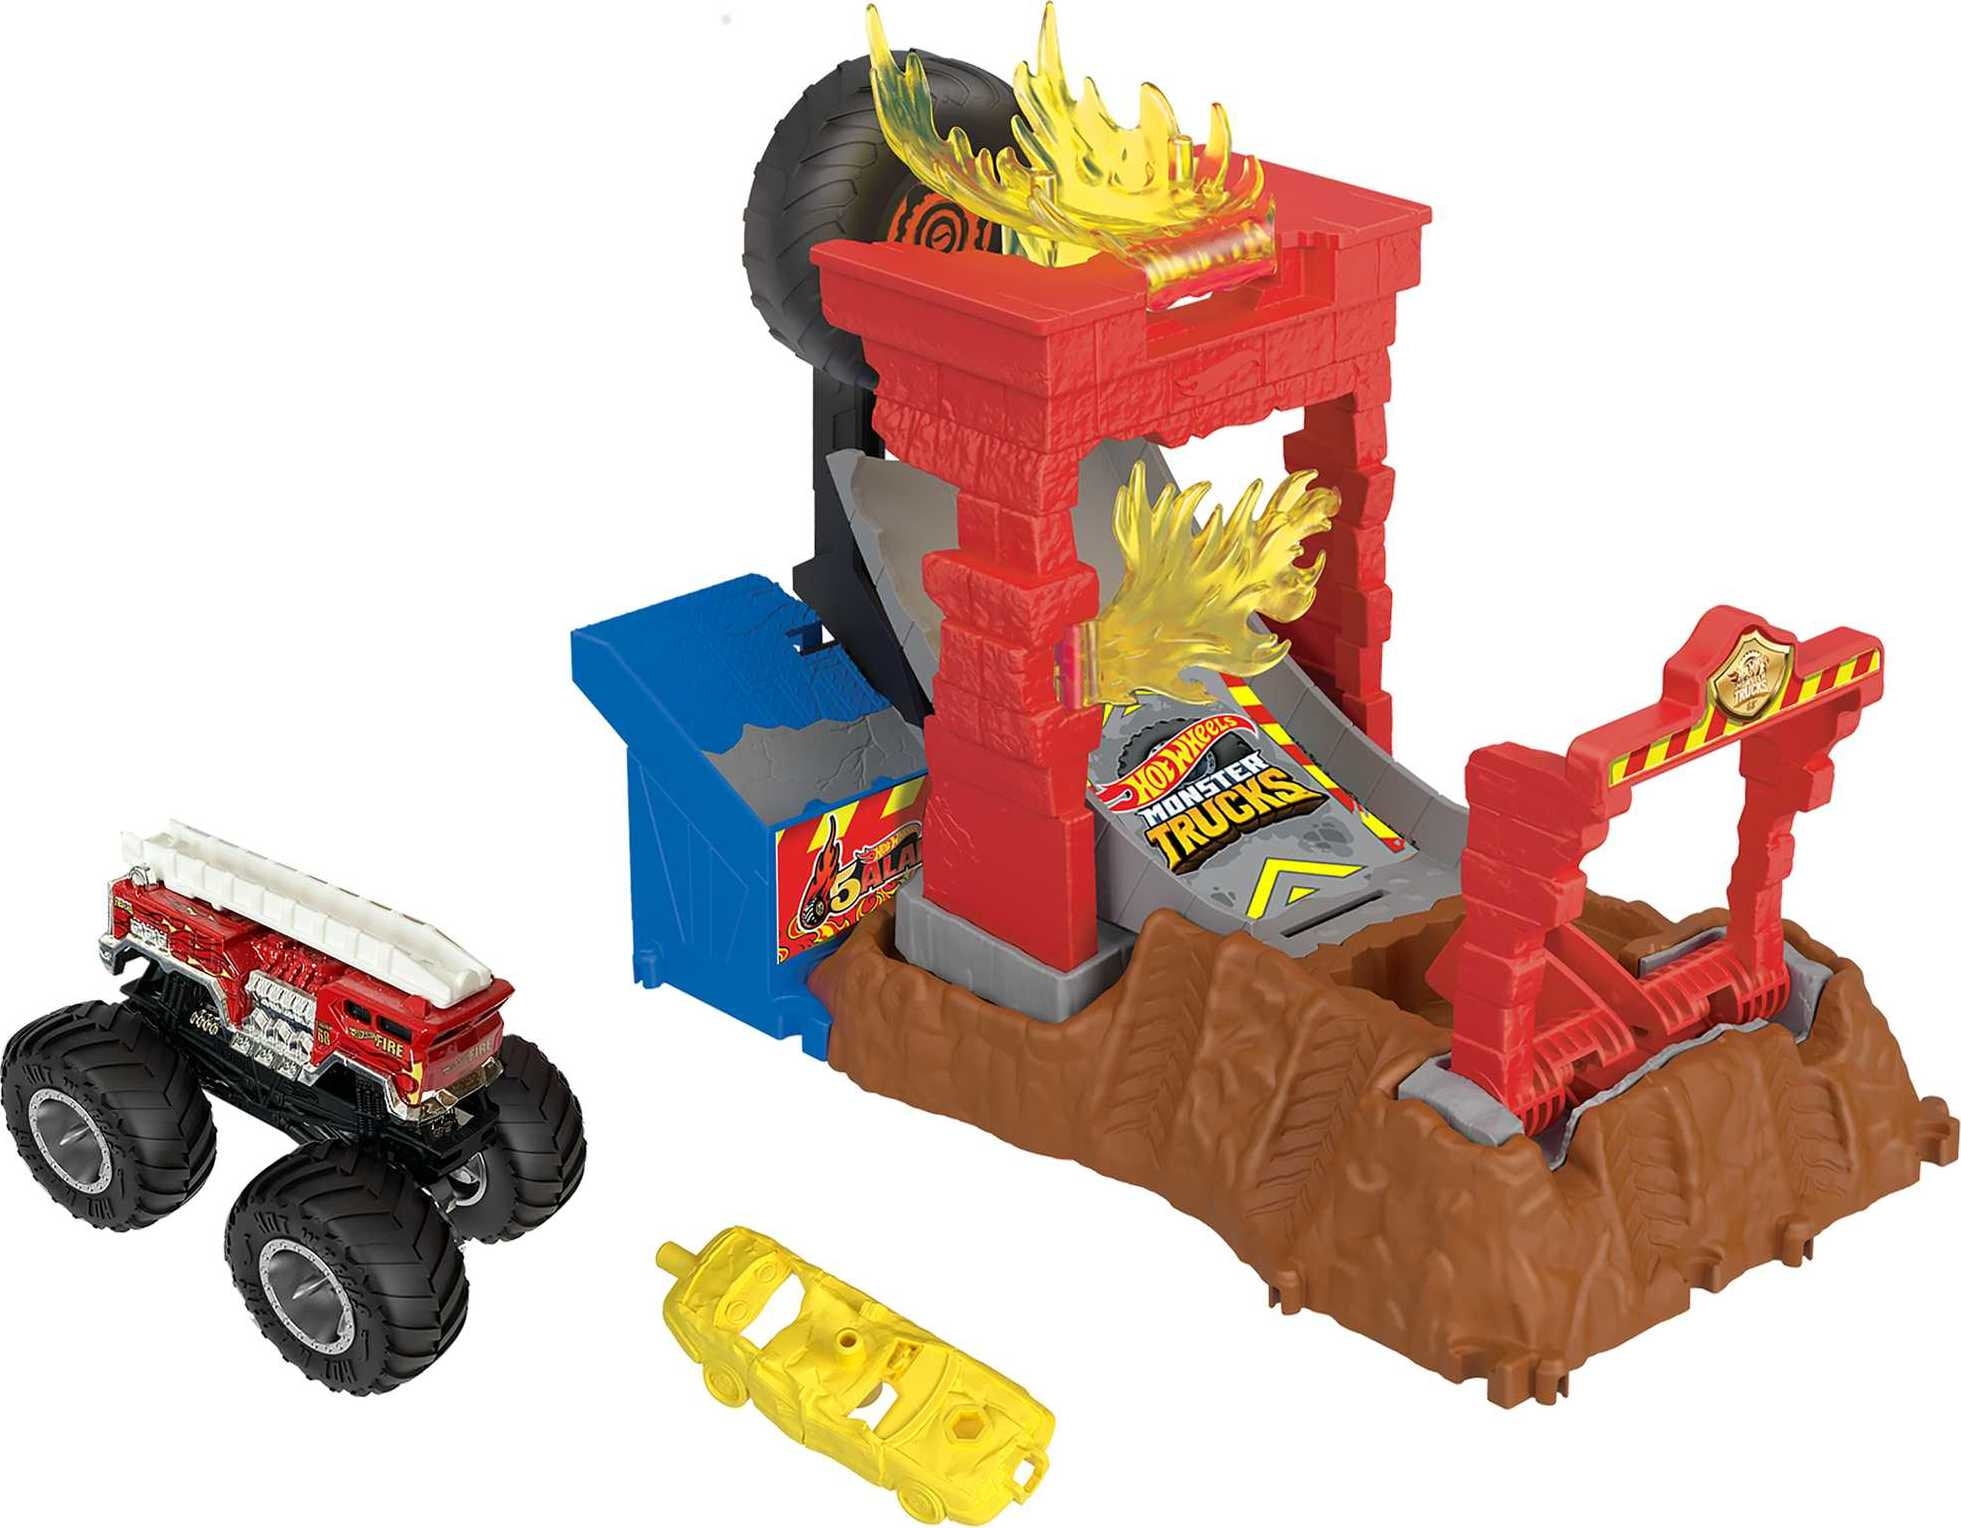 Veiculo - Hot Wheels - Monster Trucks - Arena Smashers Color